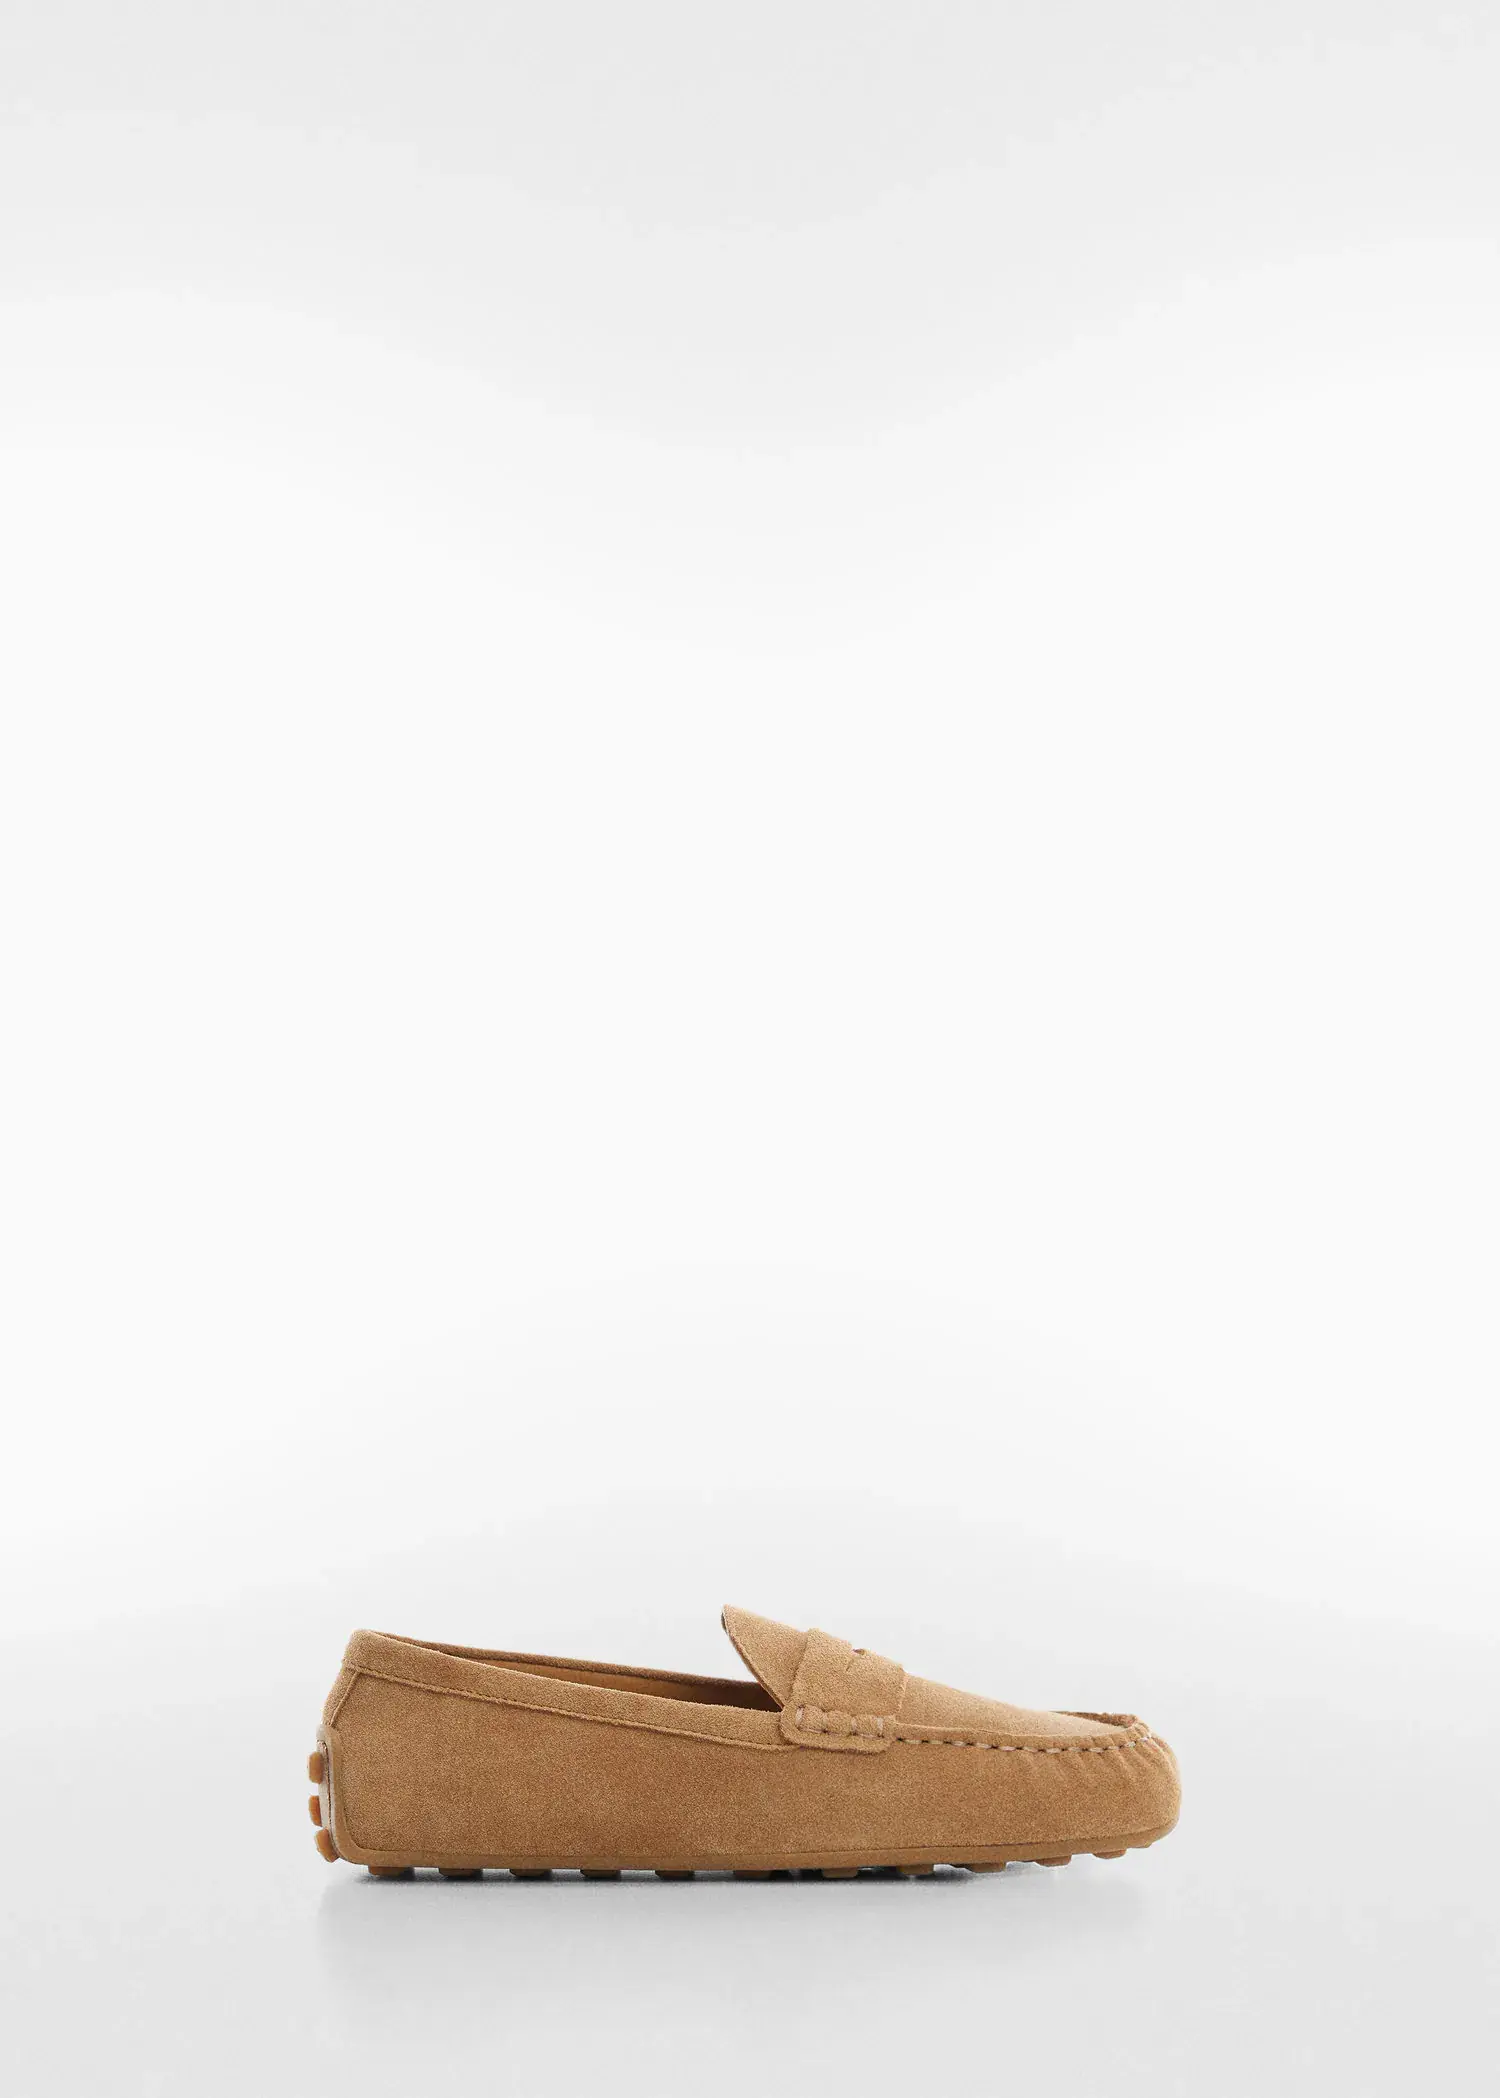 Mango Suede leather moccasin. 1